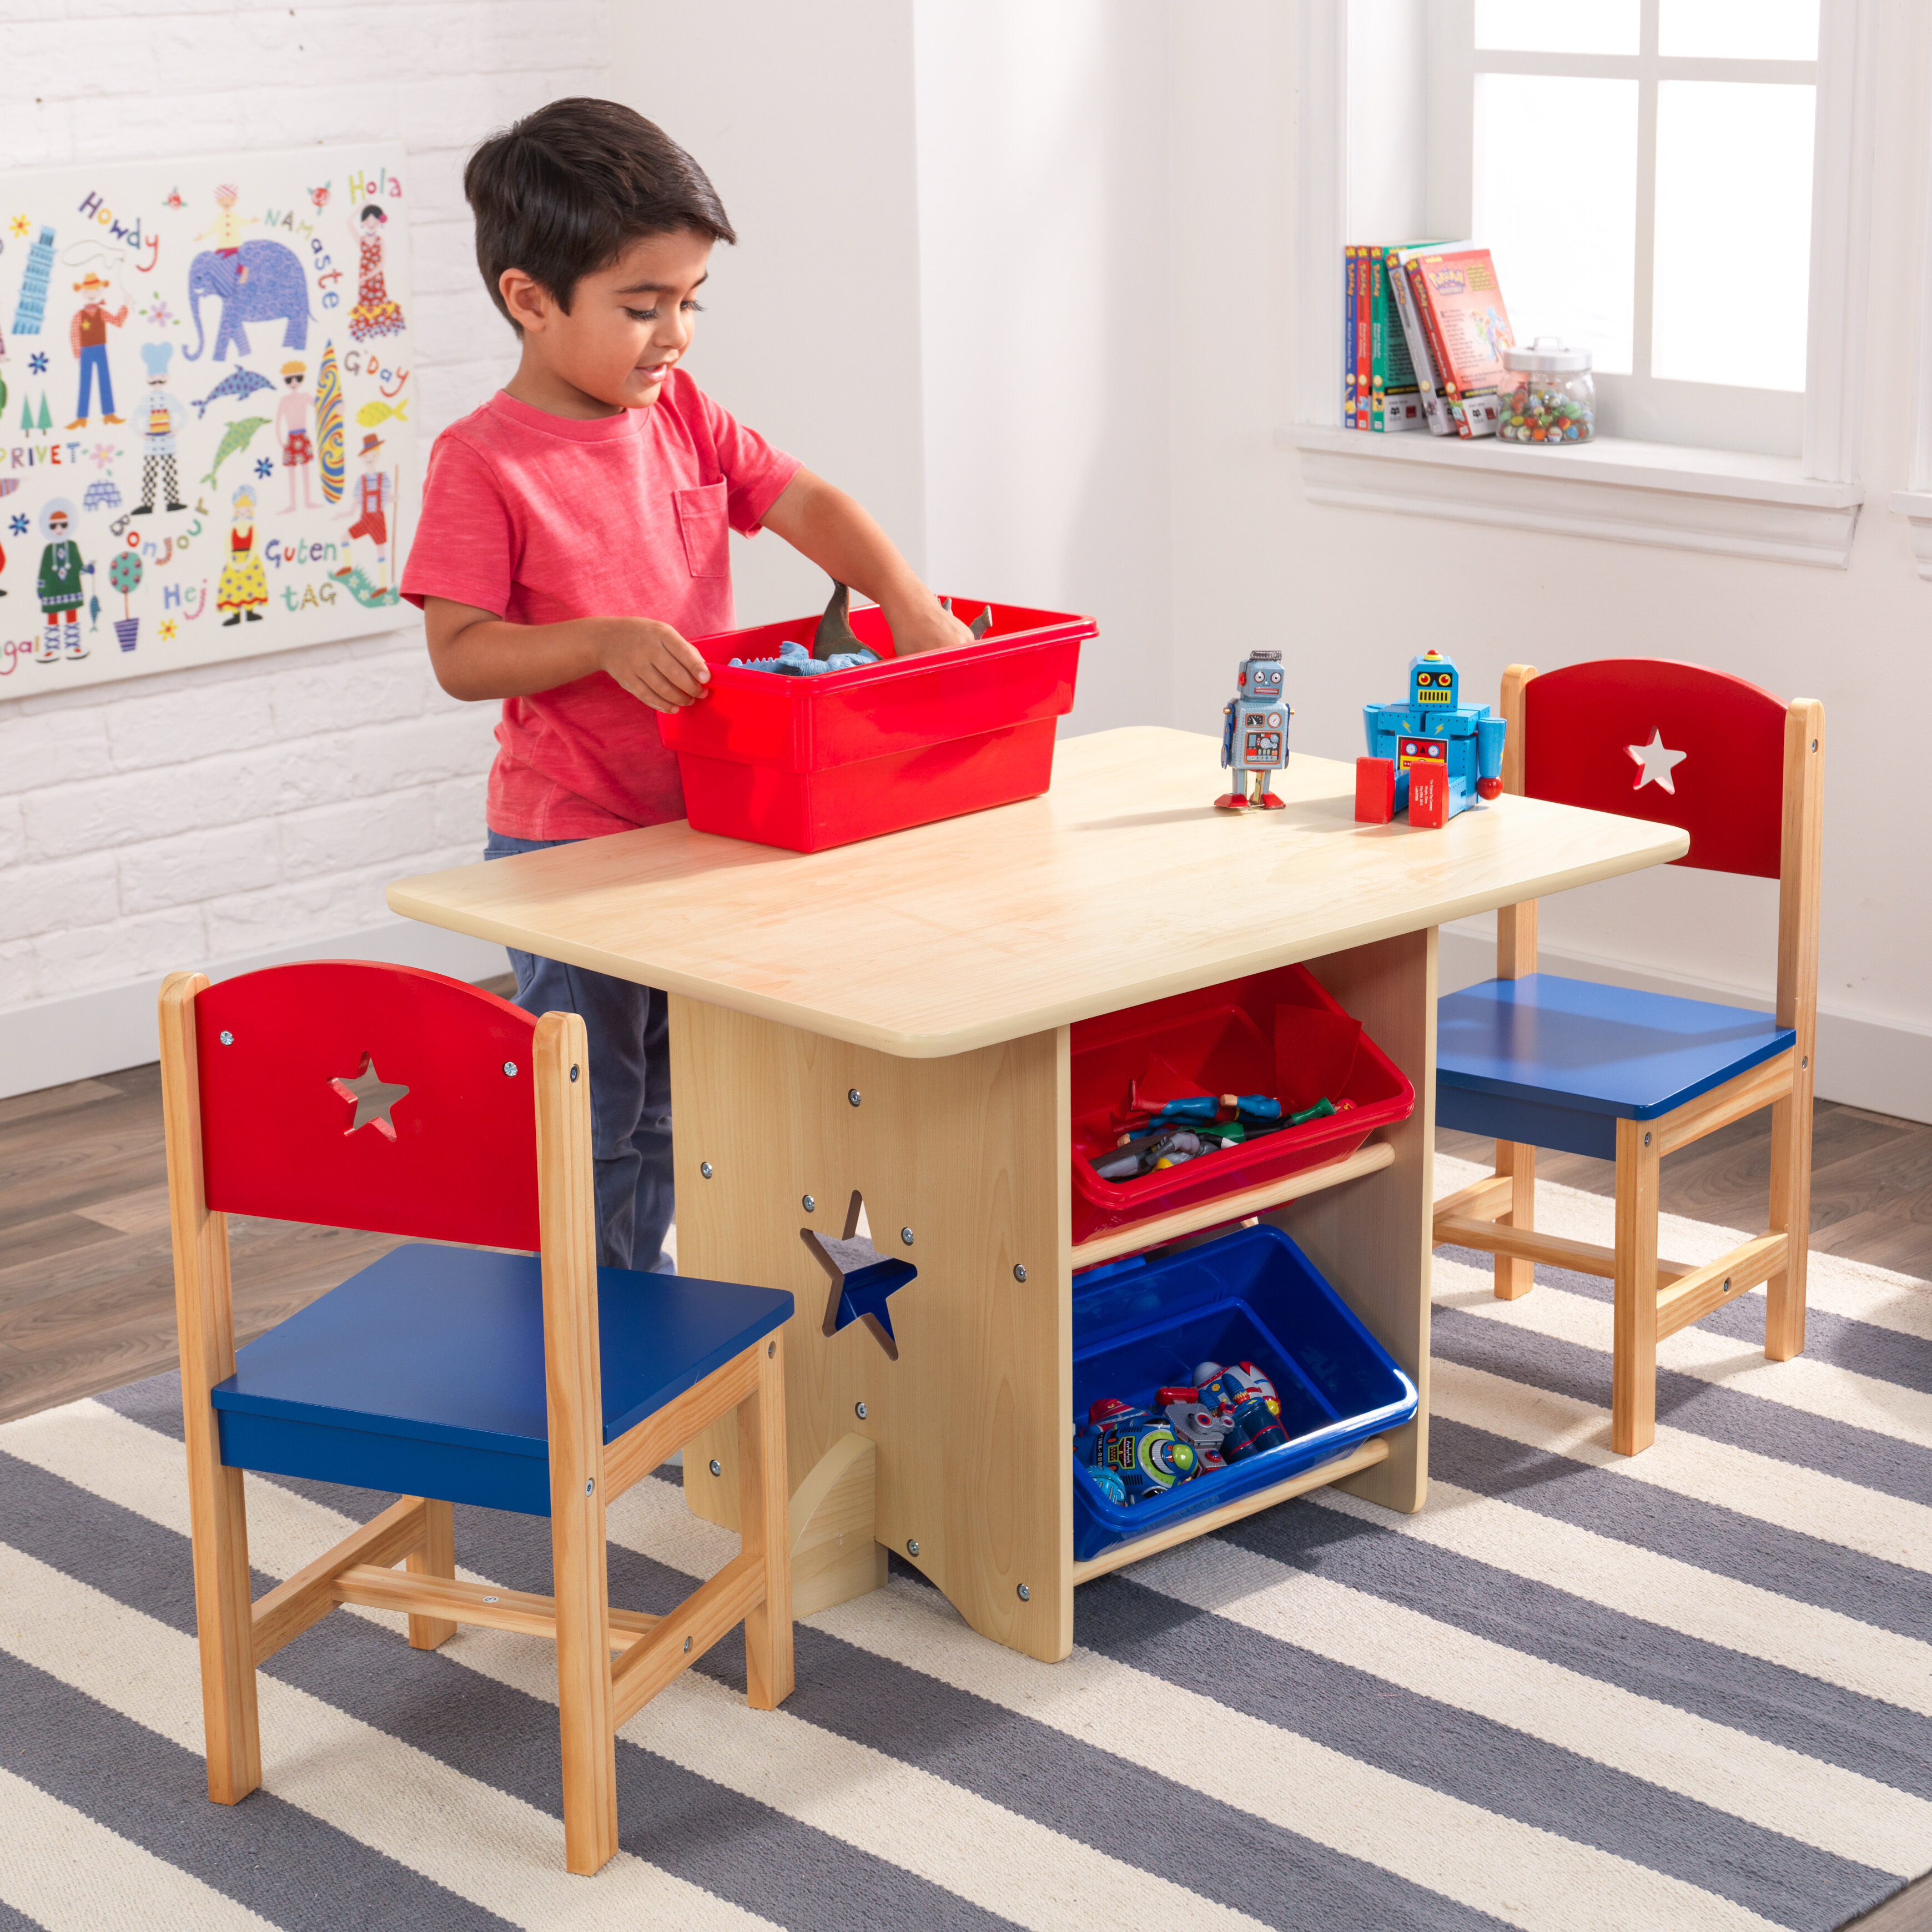 Wooden Star Table & Chair Set with 4 Bins, Red, Blue & Natural